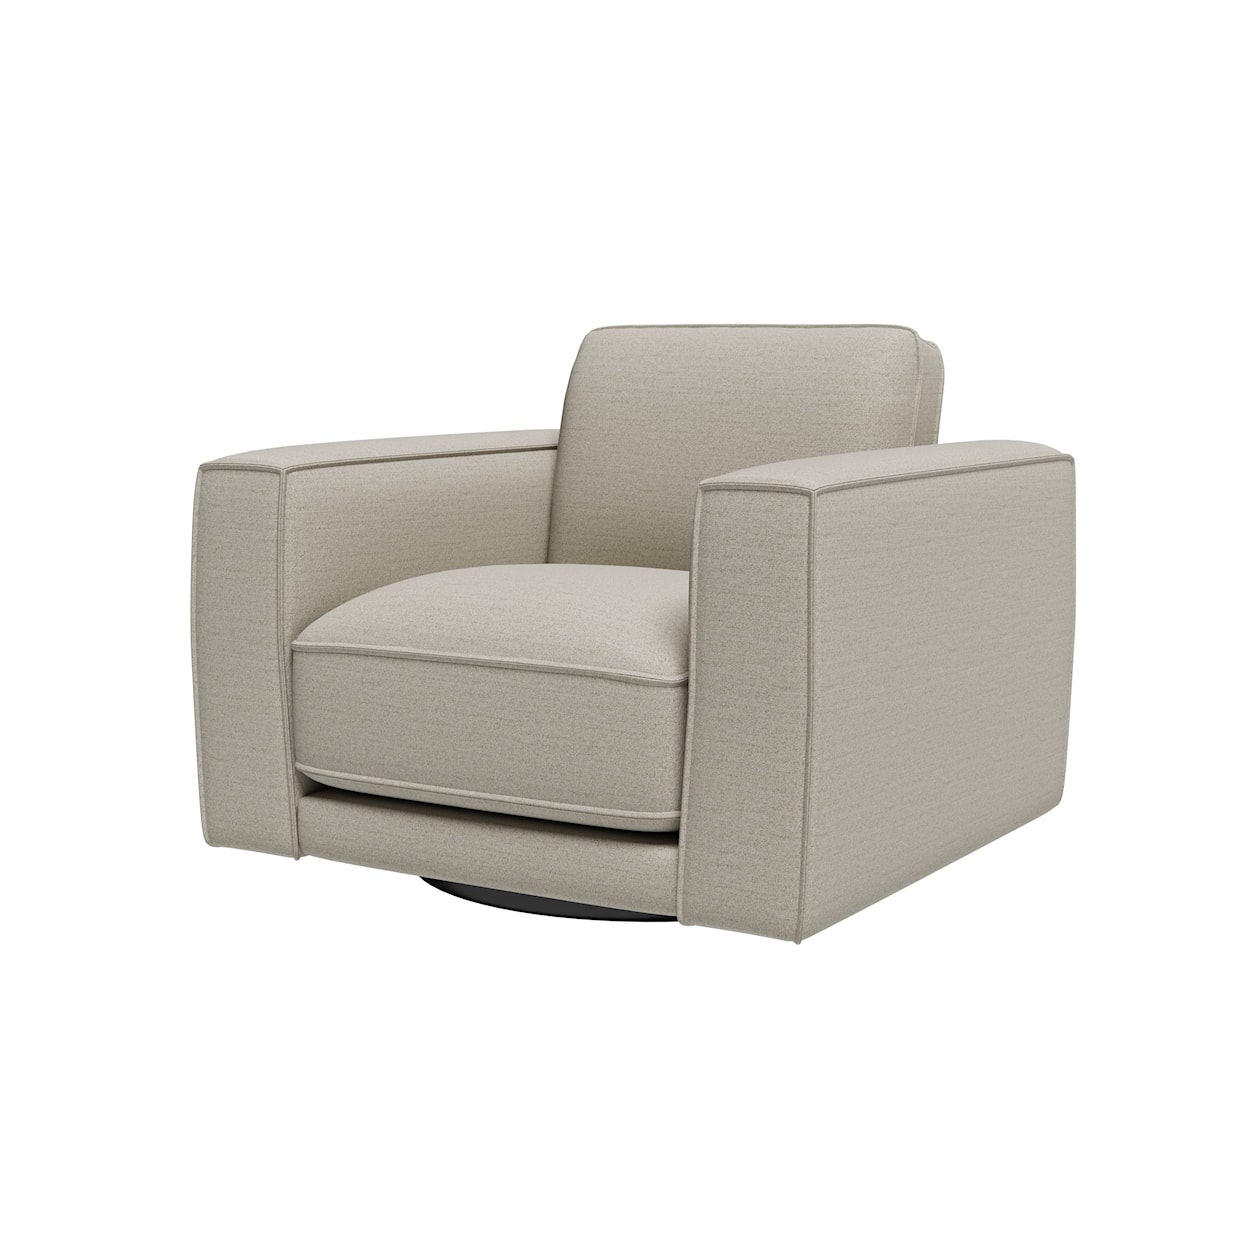 Kuka Home 2801 5 Piece Sectional with Swivel Accent Chair